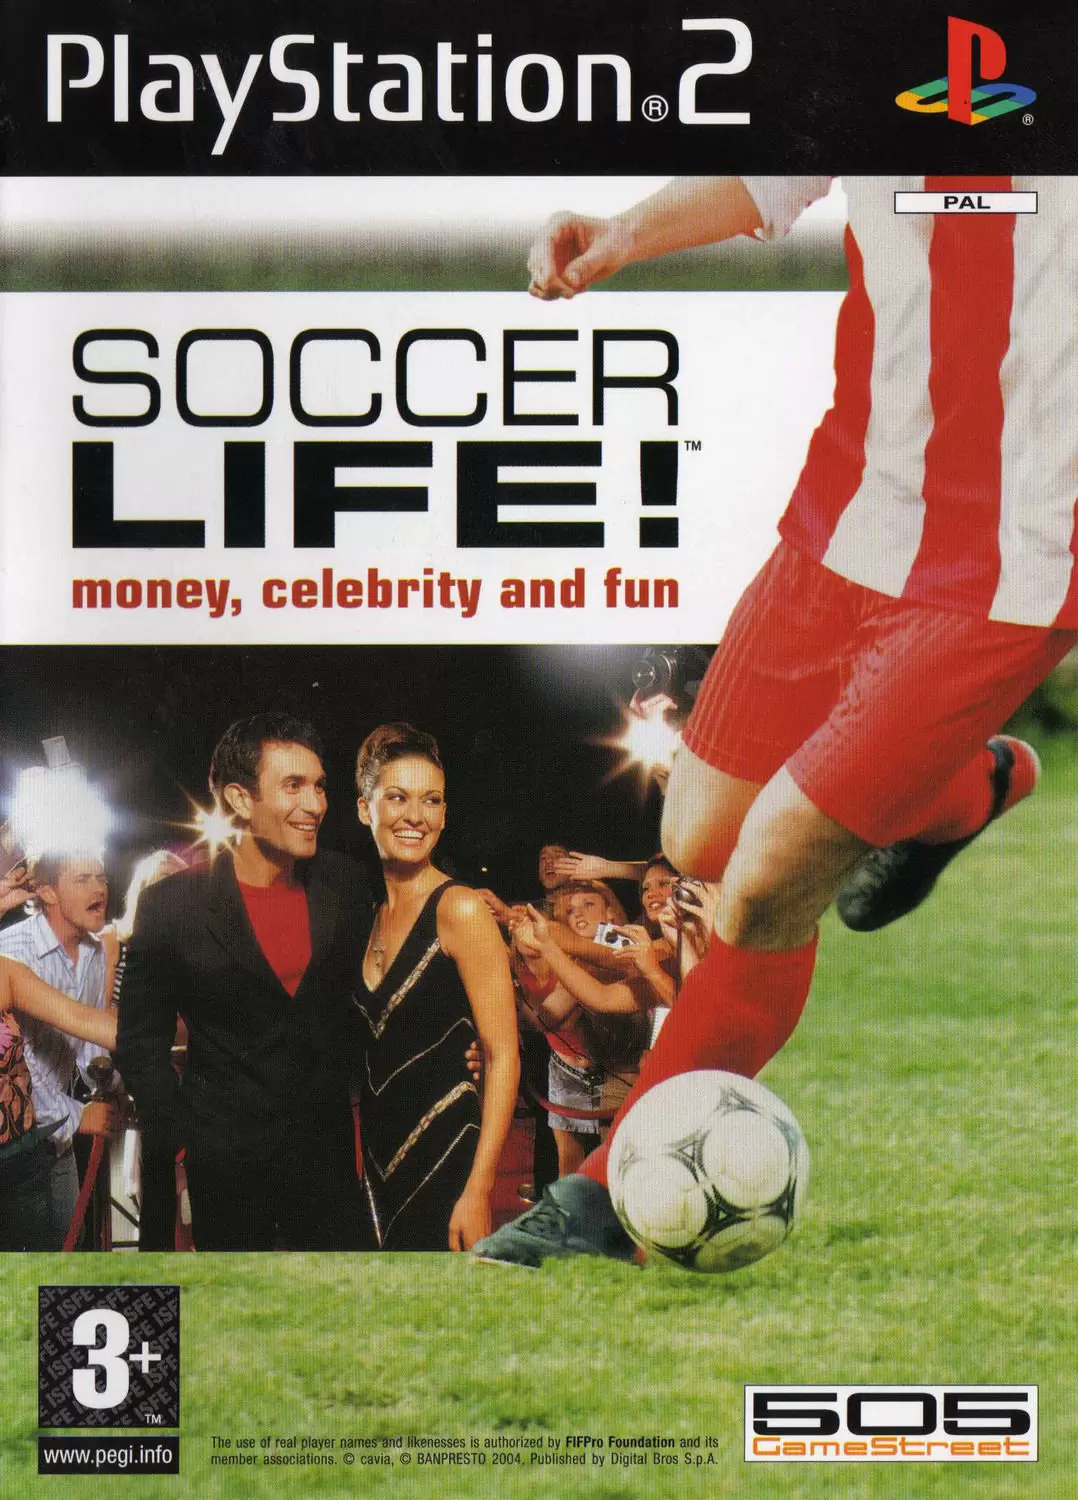 PS2 Games - Soccer Life!